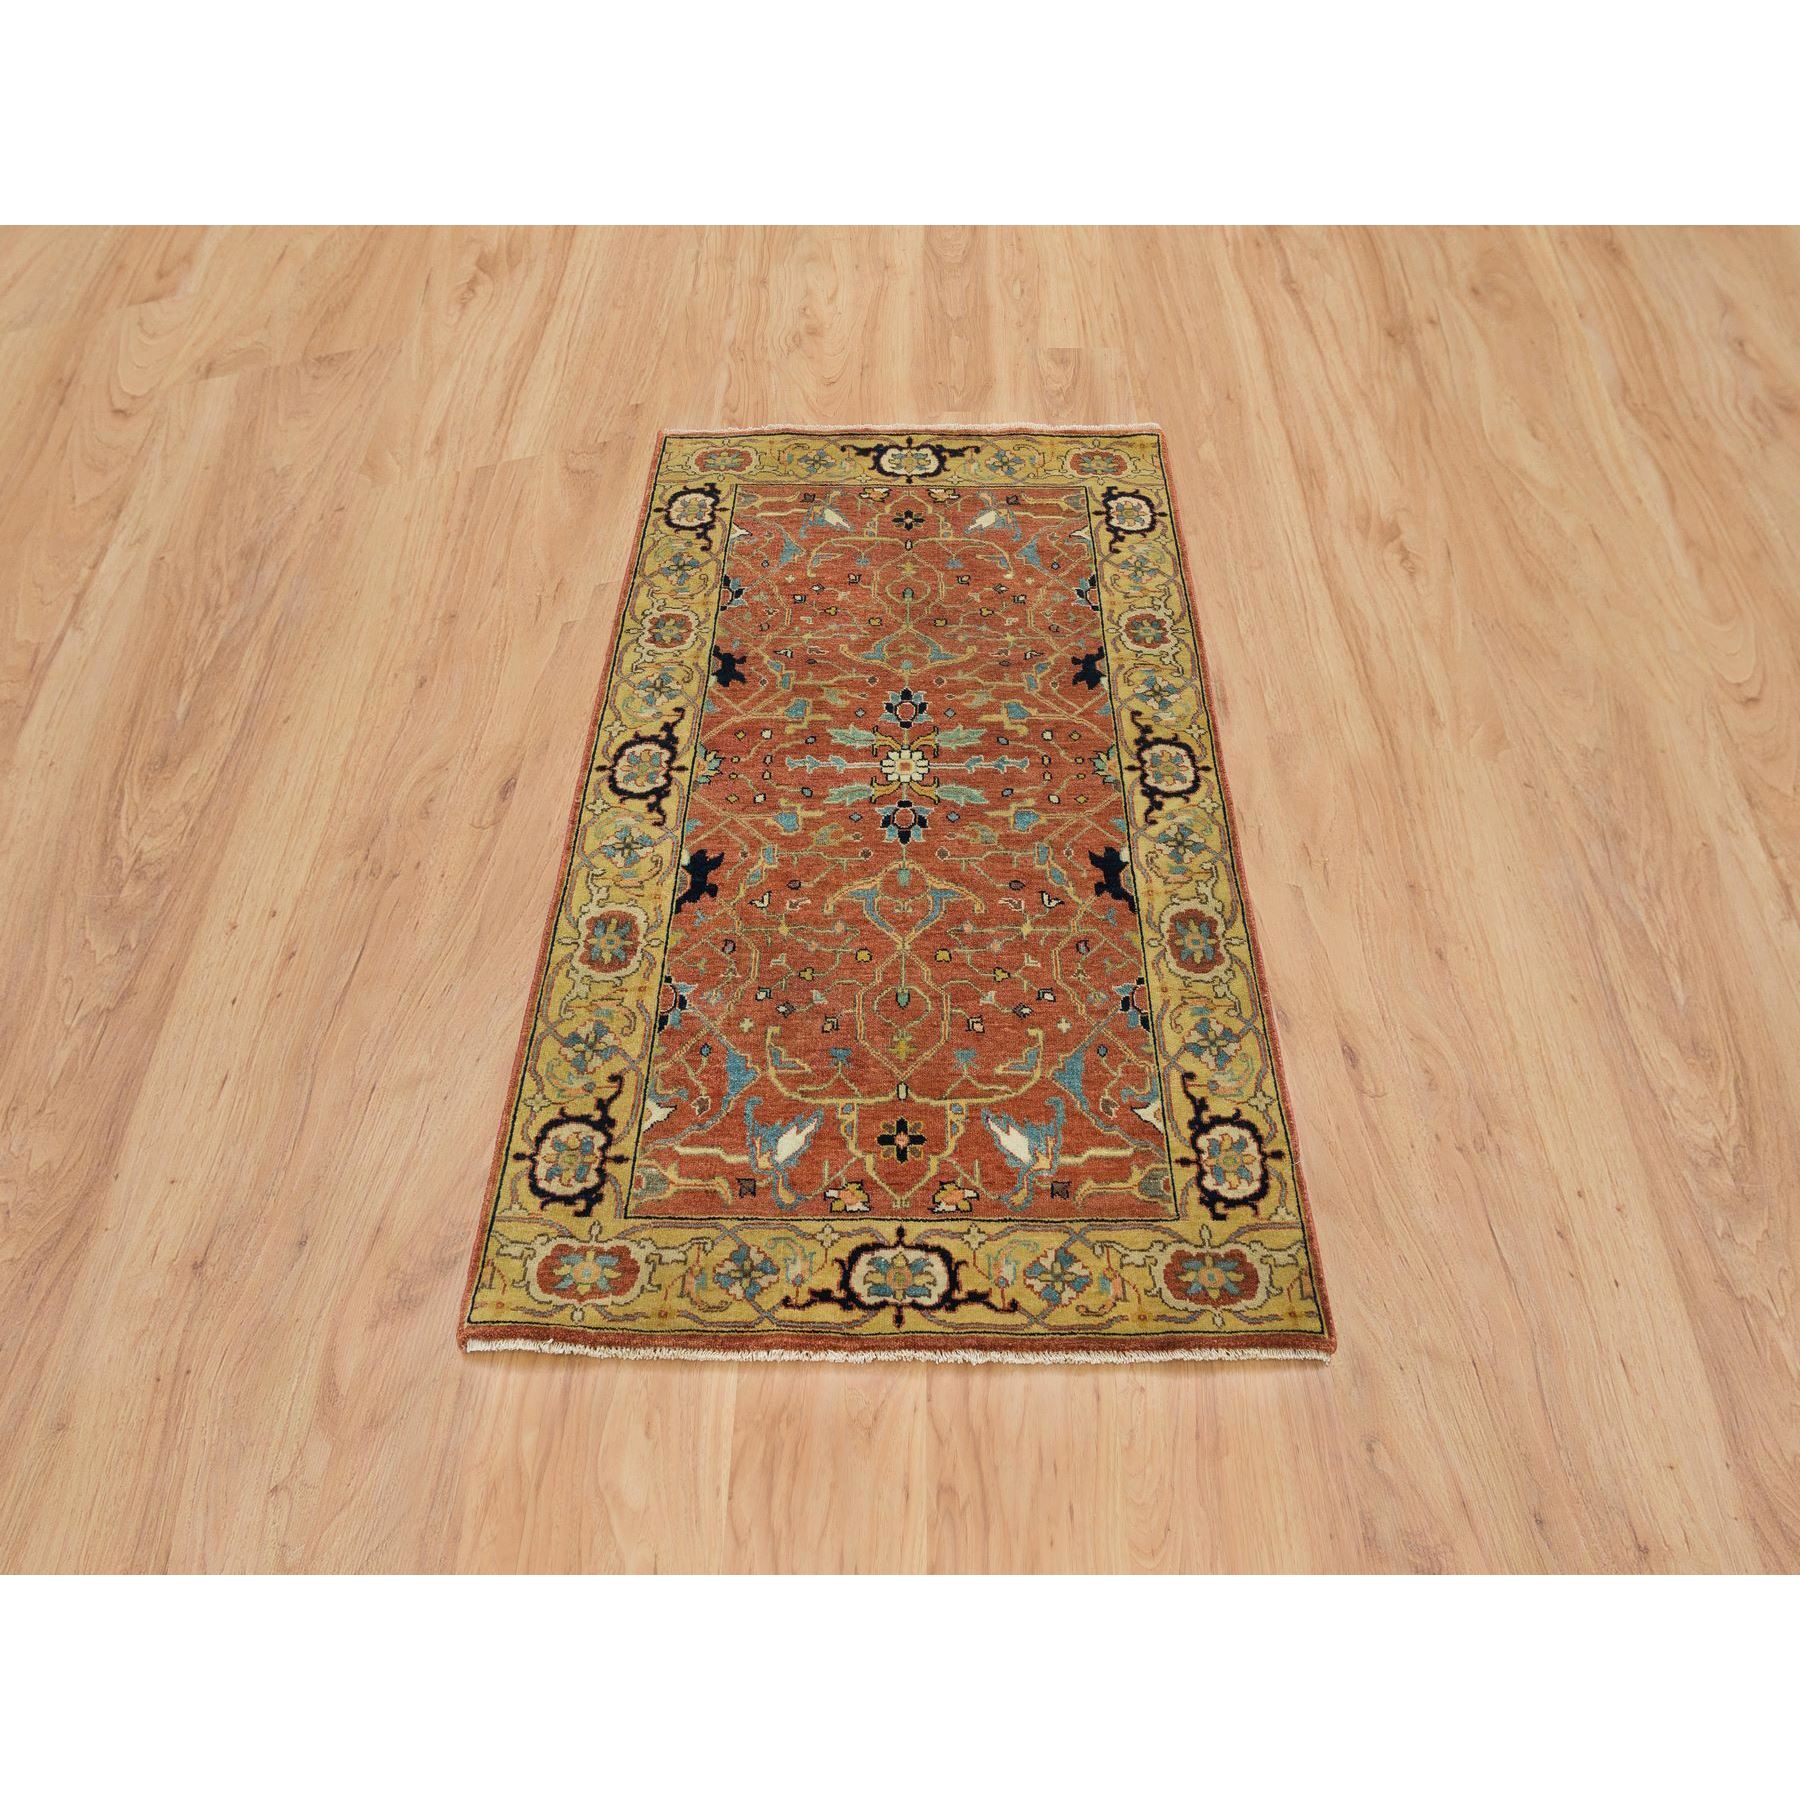  Wool Hand-Knotted Area Rug 3'1